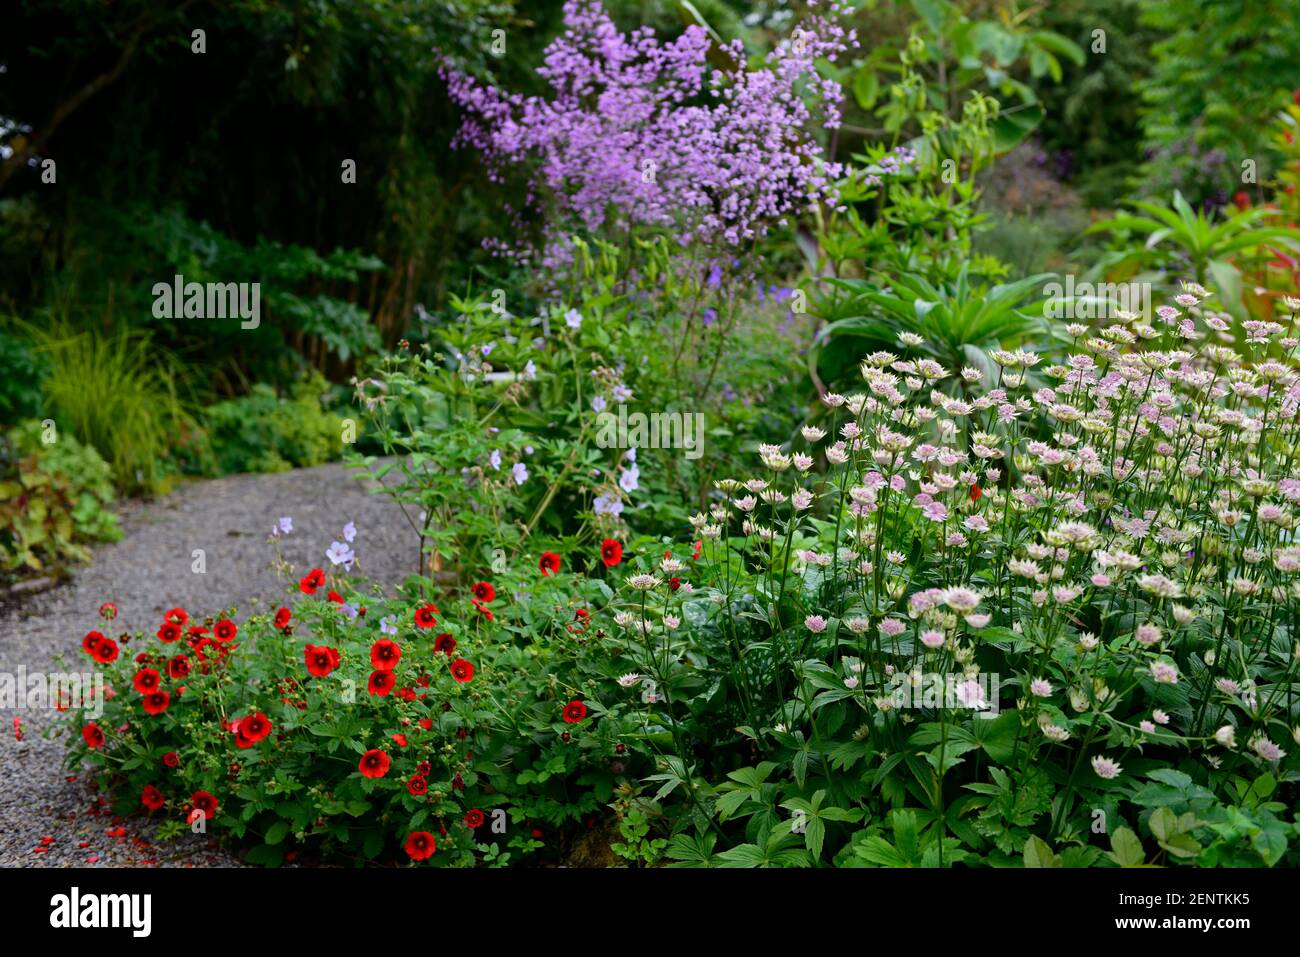 astrantia bo ann,Potentilla thurberi Monarch's Velvet,Thalictrum delavayi, Chinese meadow-rue,white red purple flowers,flowering,mixed bed,border,mixe Stock Photo